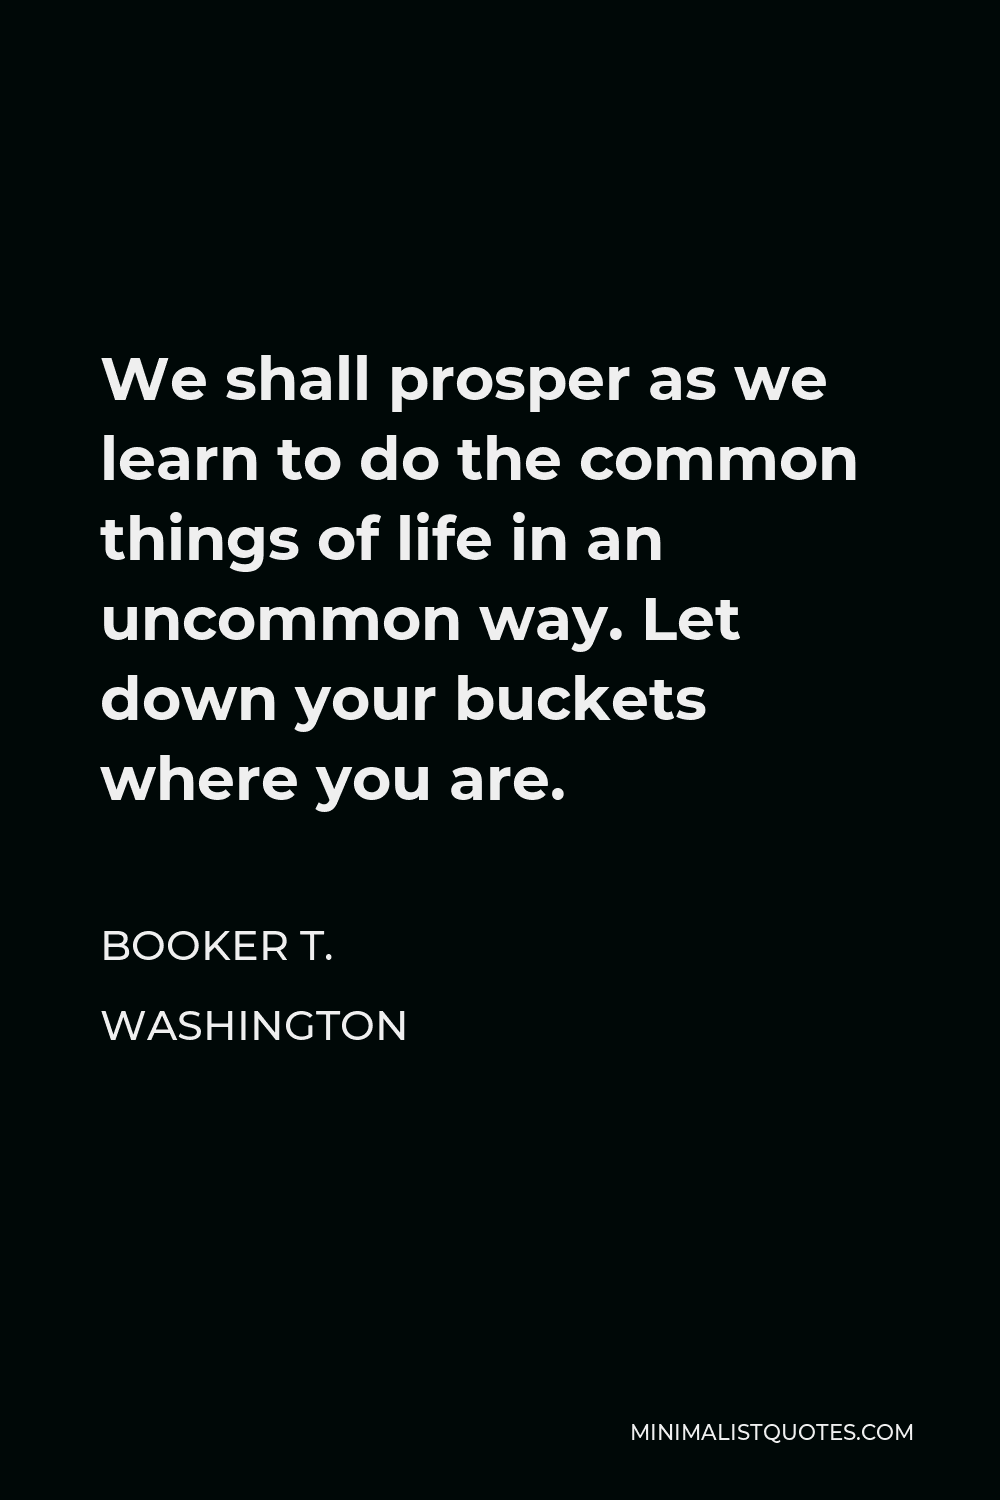 Booker T. Washington Quote - We shall prosper as we learn to do the common things of life in an uncommon way. Let down your buckets where you are.